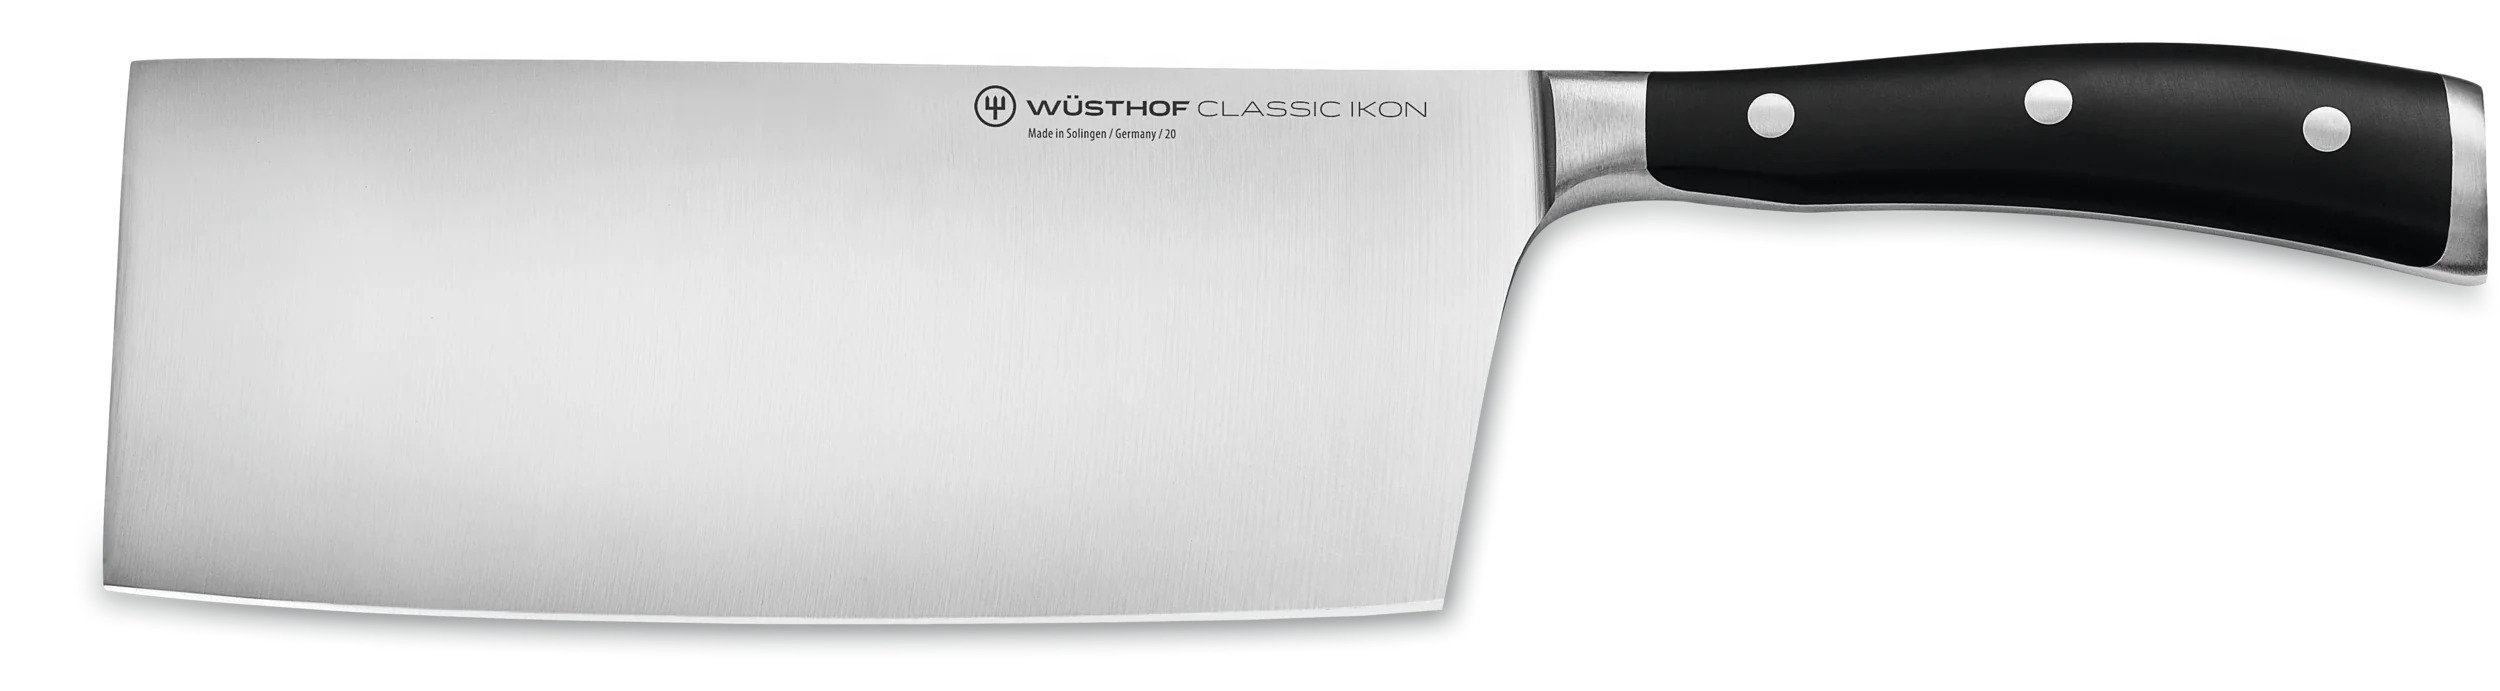 picture of a Wusthof German brand meat cleaver